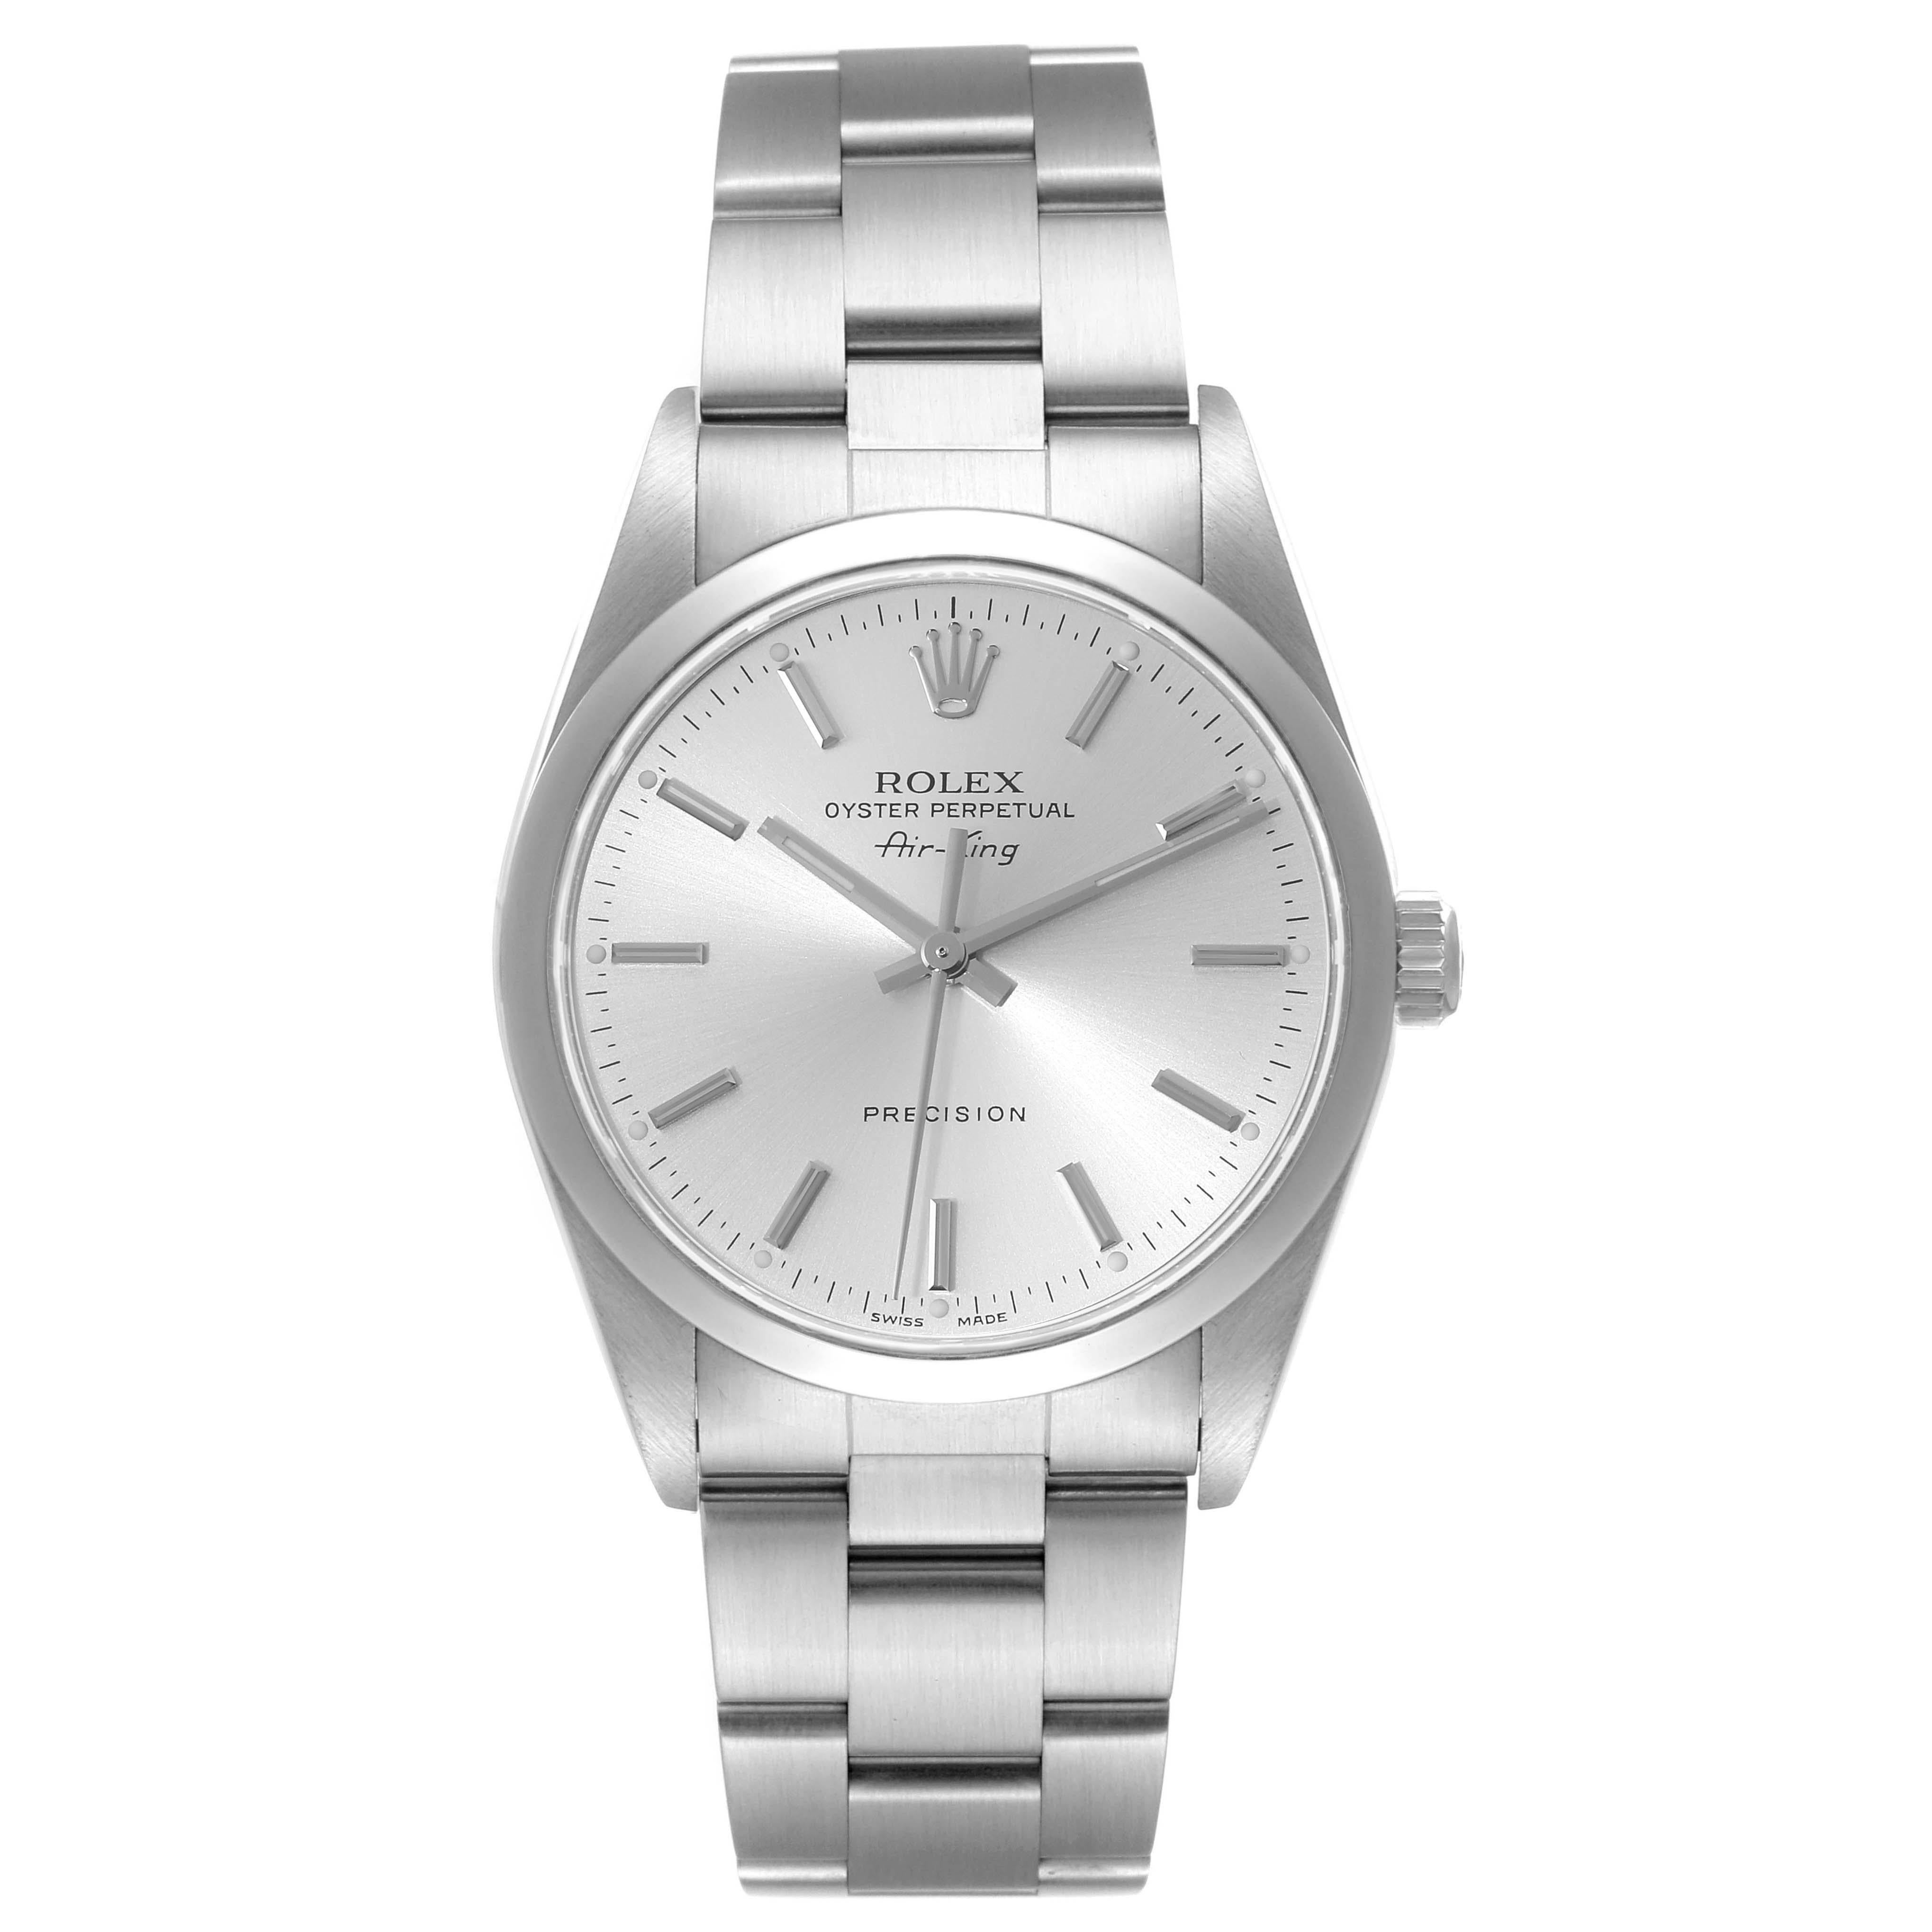 Rolex Air King Silver Dial Smooth Bezel Steel Mens Watch 14000 Box Papers. Automatic self-winding movement. Stainless steel case 34 mm in diameter. Rolex logo on the crown. Stainless steel smooth bezel. Scratch resistant sapphire crystal. Silver